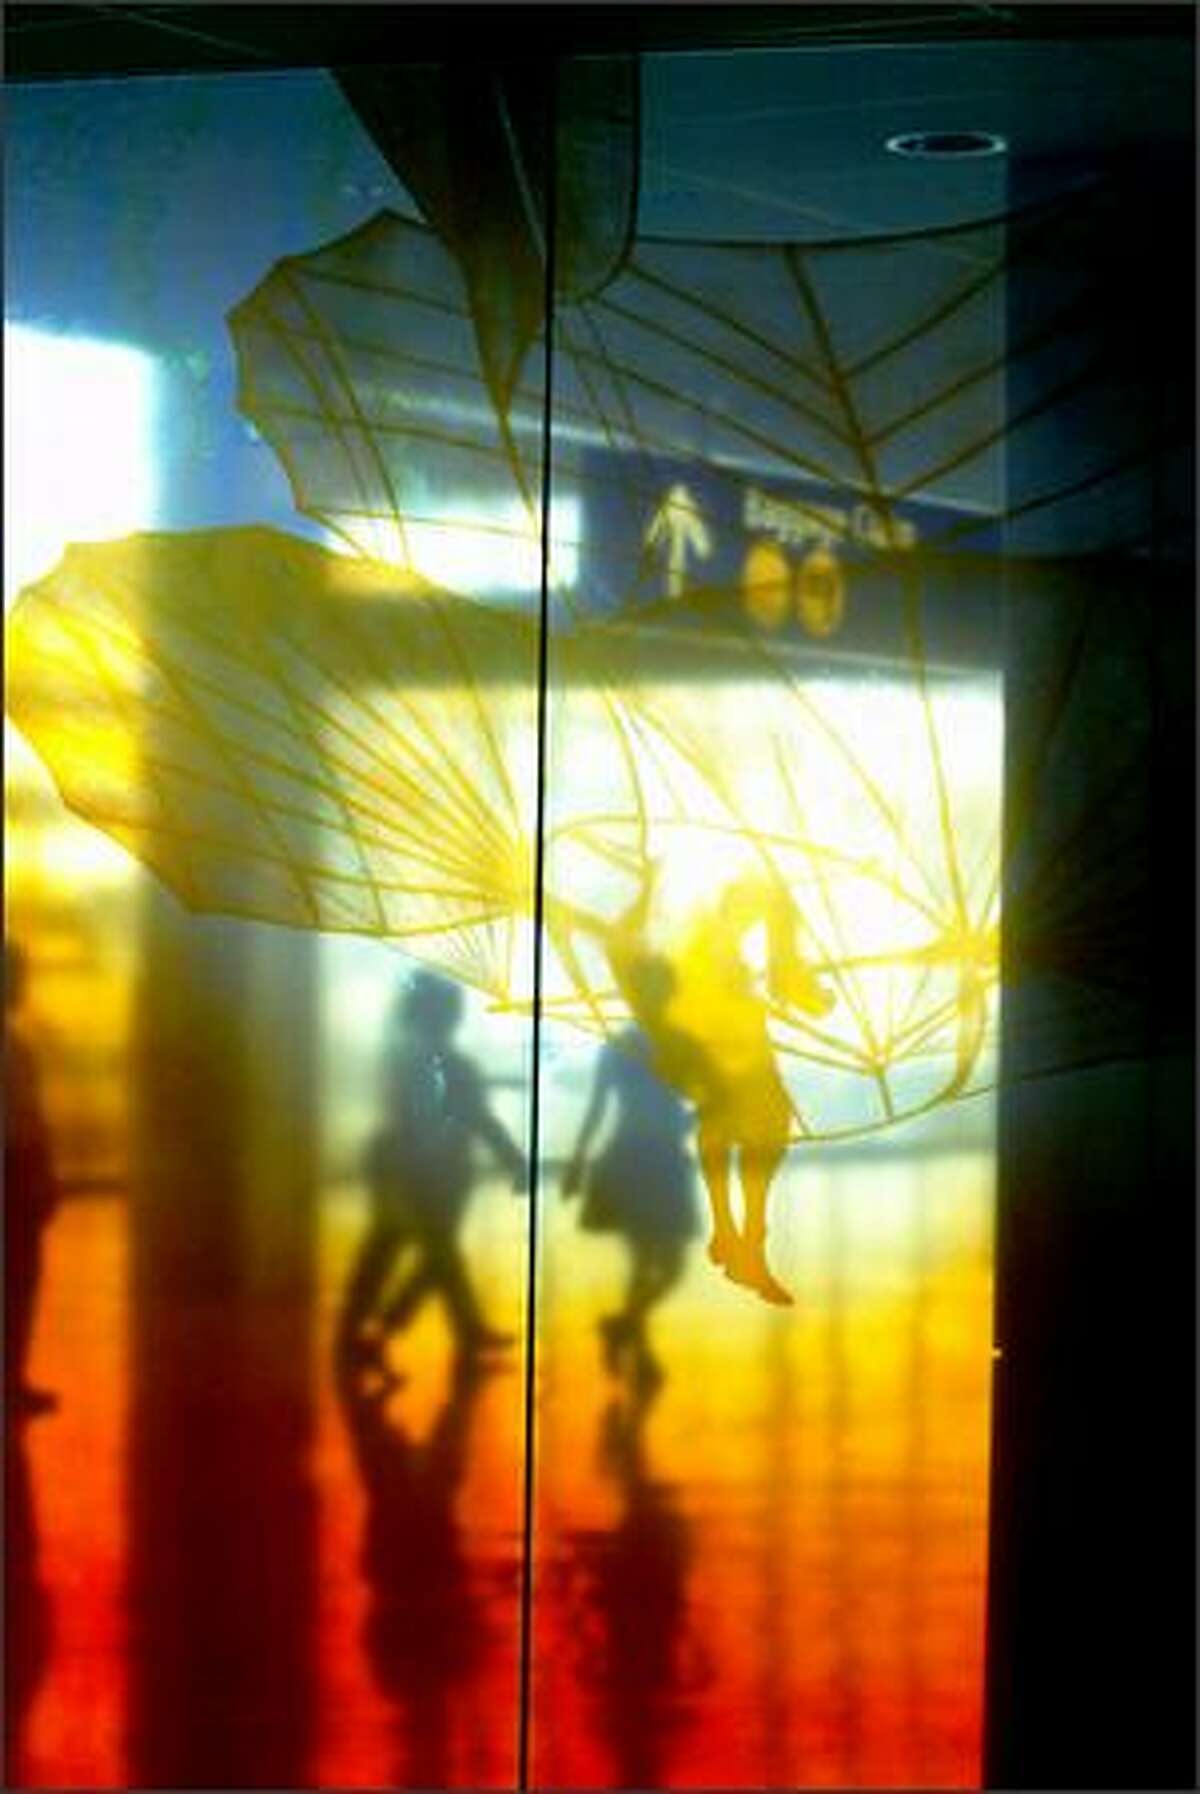 Passengers pass by the new amber glass wall installation that also serves as a security wall in the new Sea-Tac Concourse A. Linda Beaumont's "Traveling Light" comprises 82 painted and silk-screened glass panels.